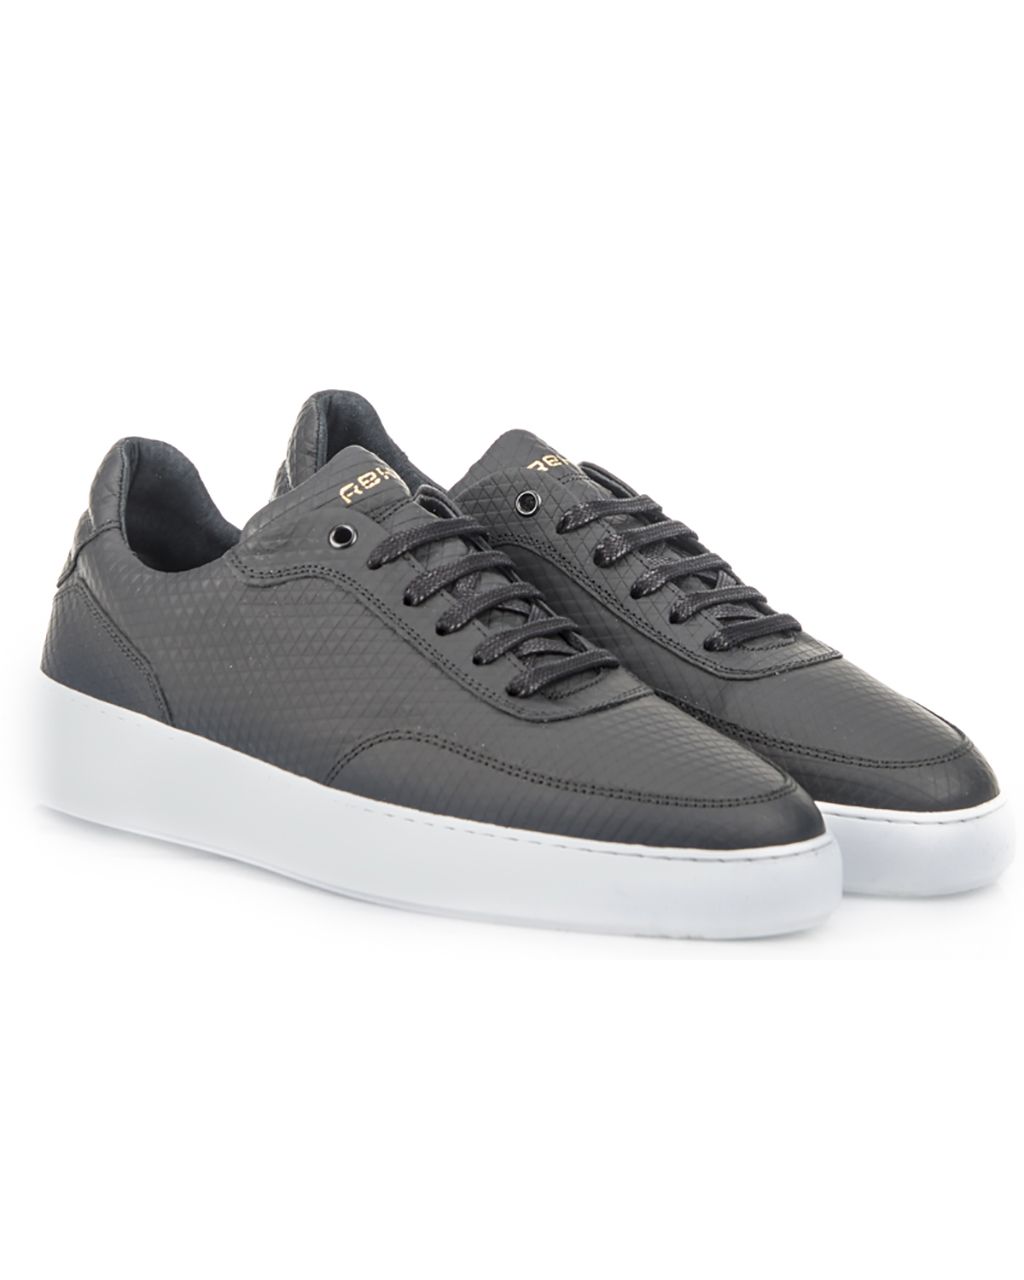 REHAB TAYLOR TRIANGLE Sneakers Zwart 071660-001-41